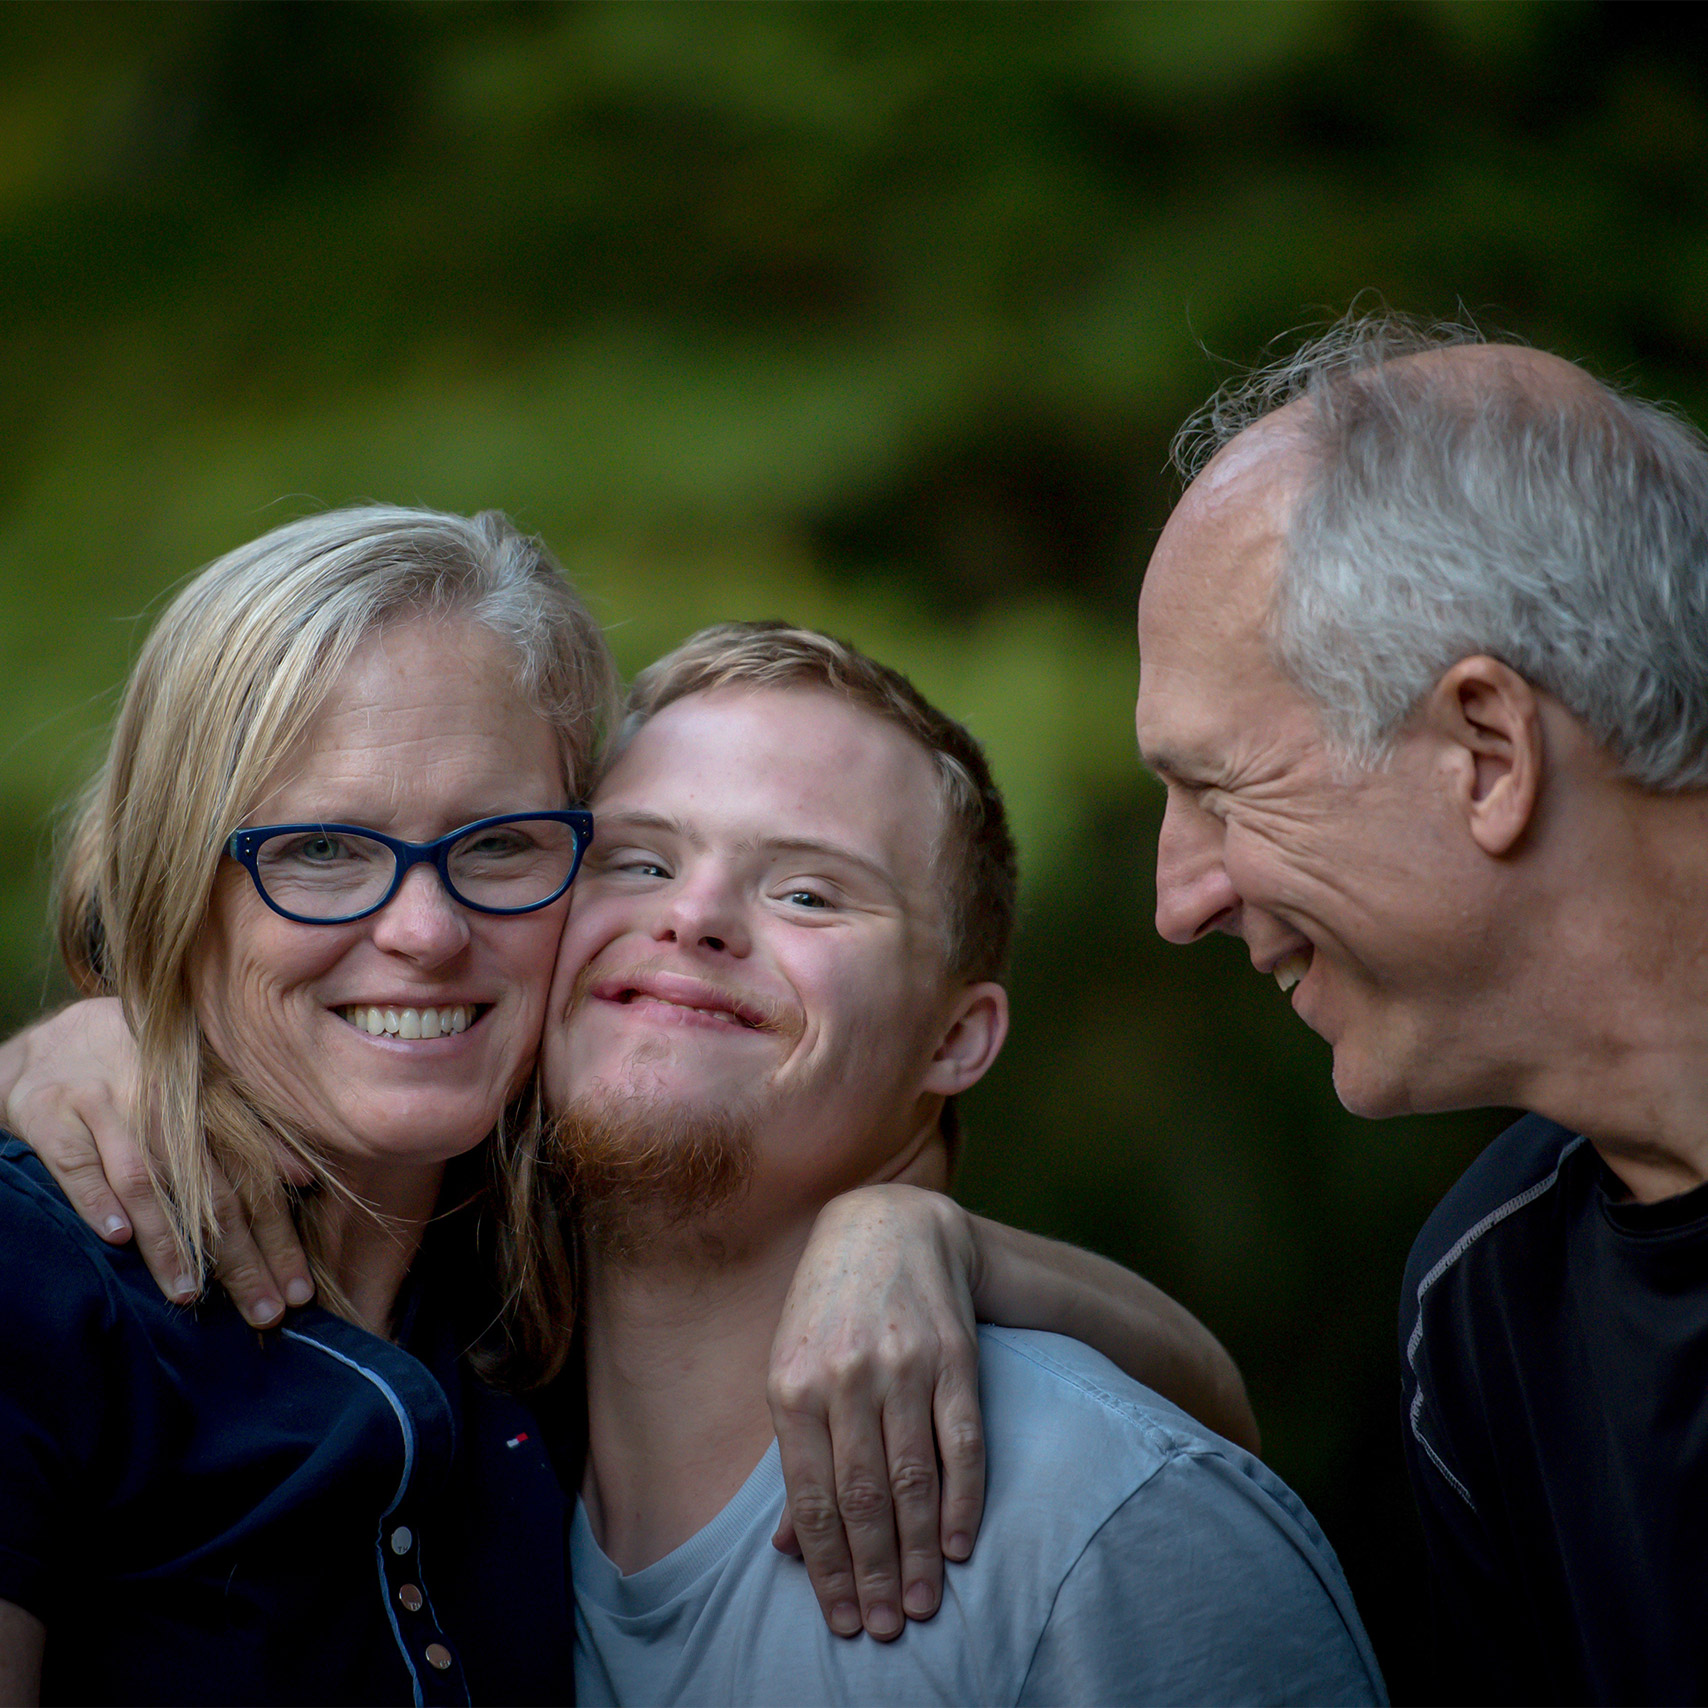 mother hugs son while father watches and smiles